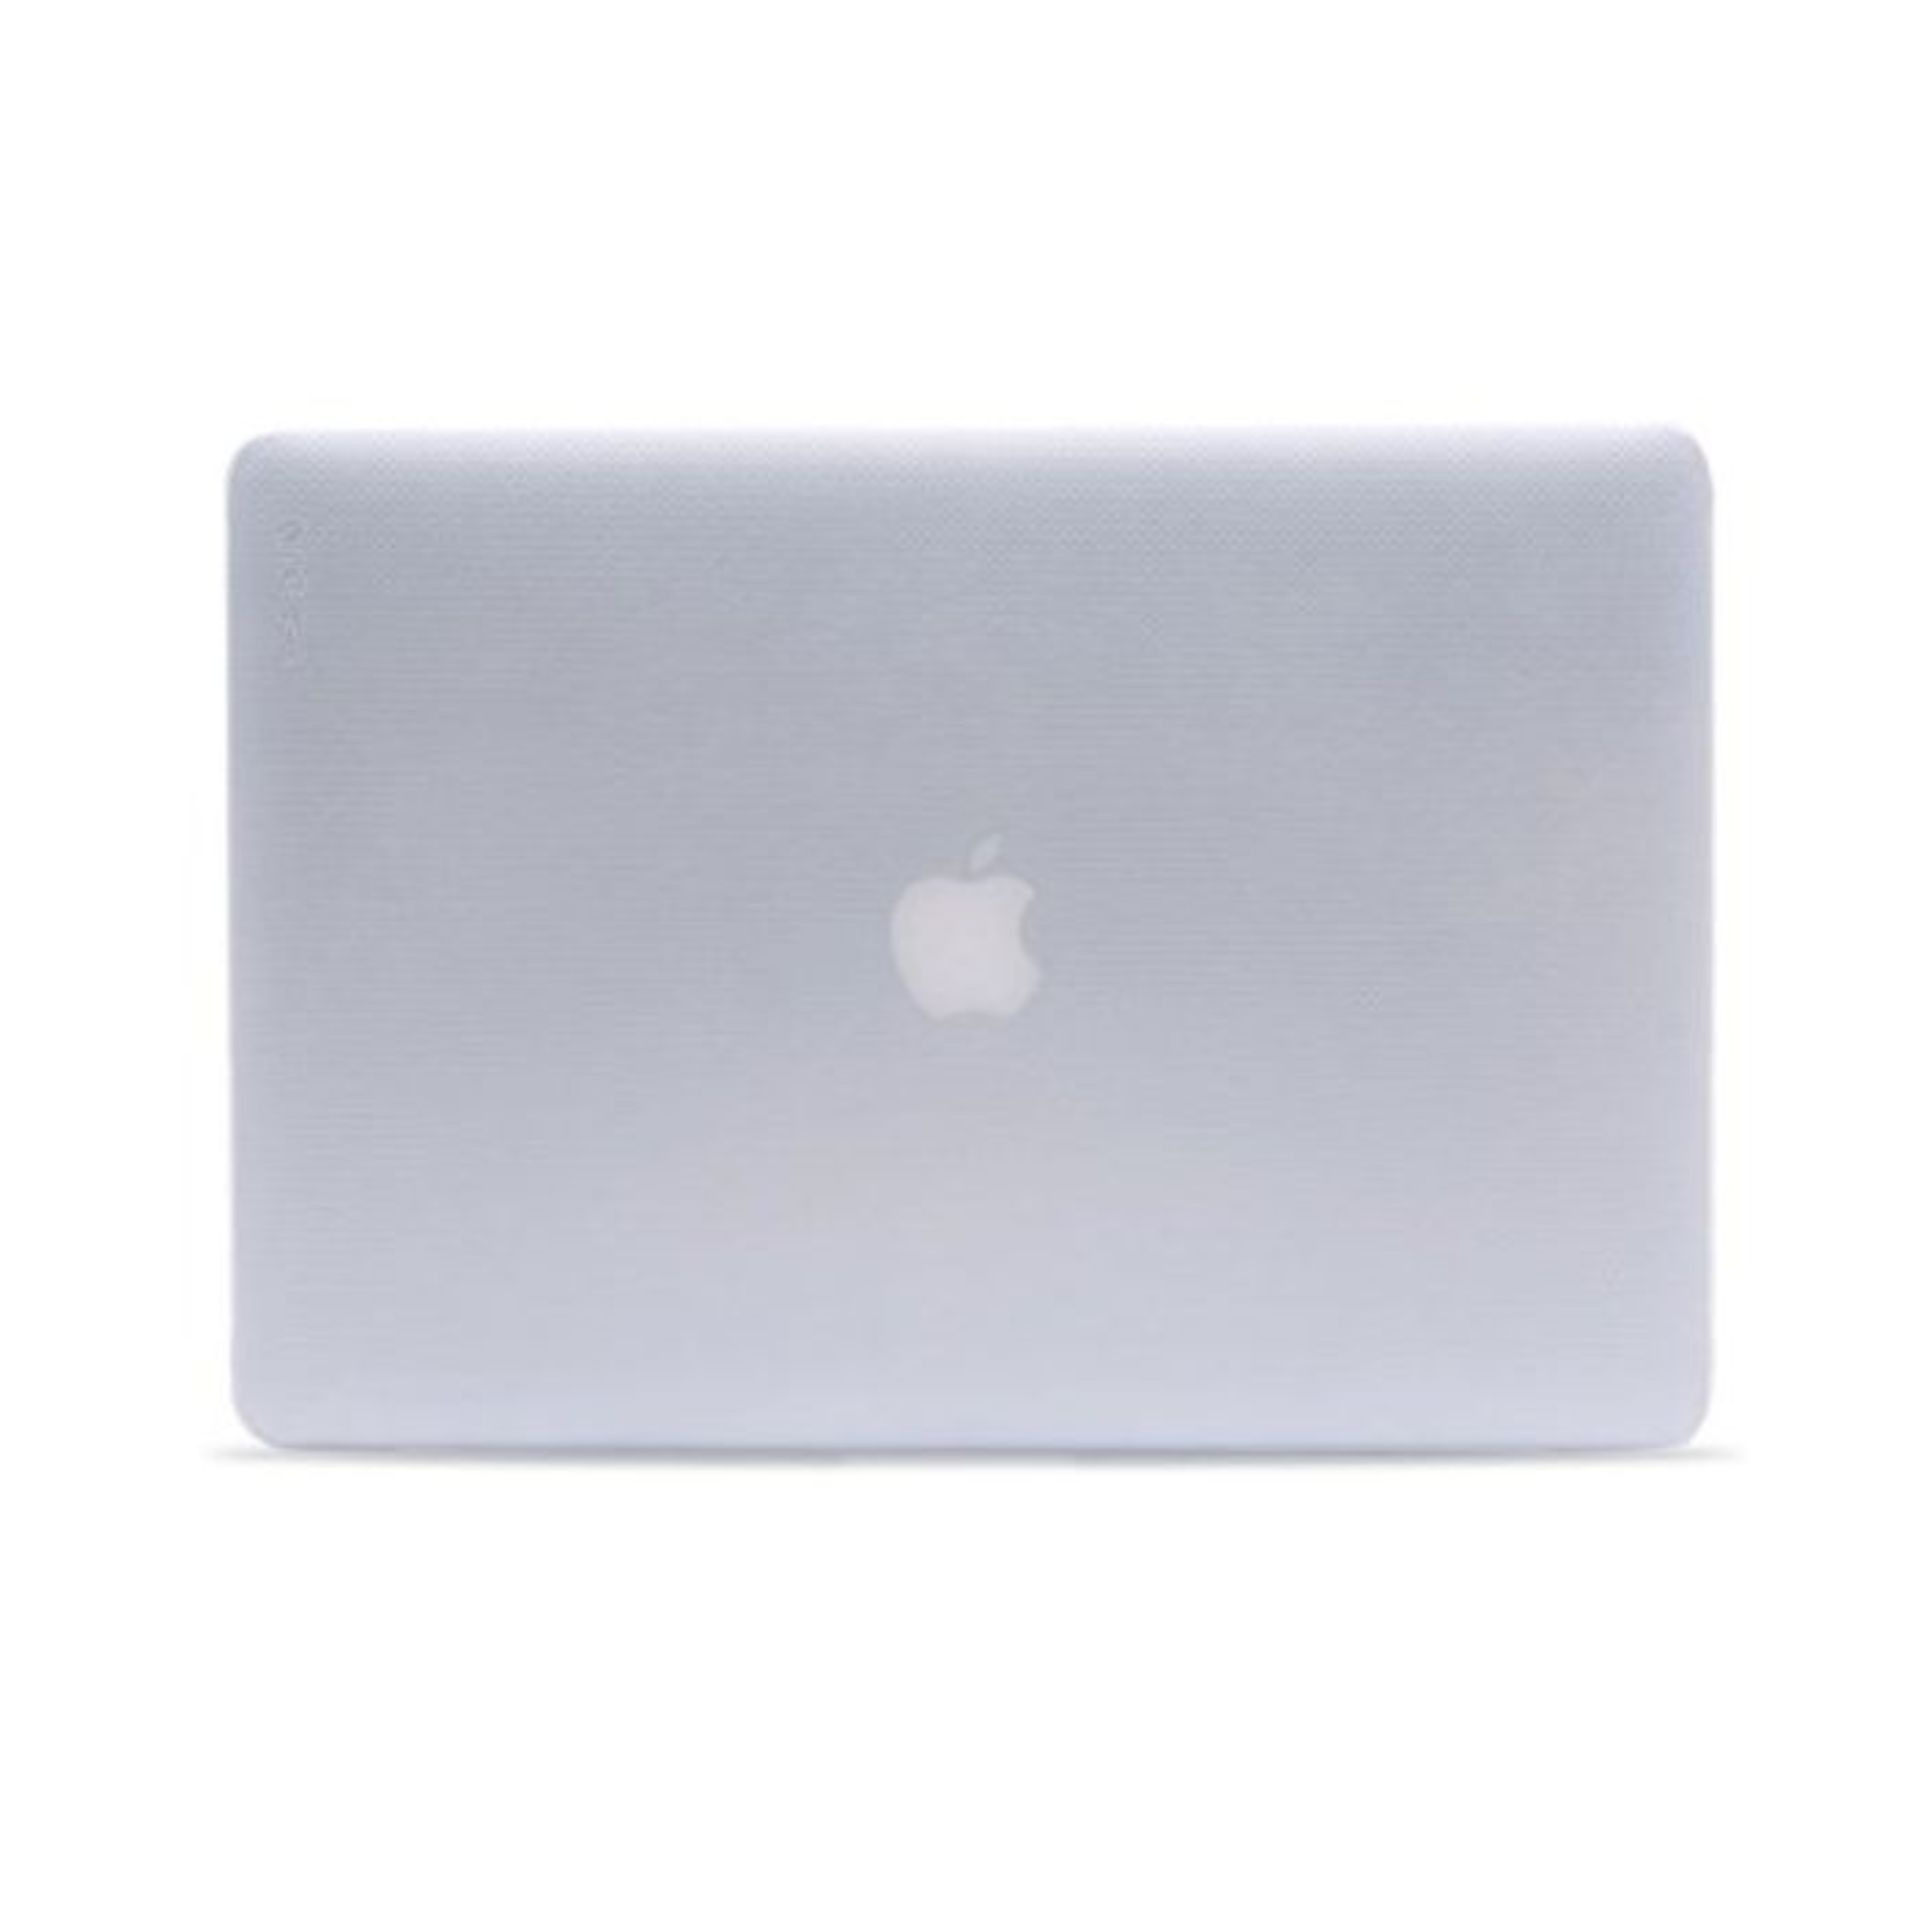 Incase "Pearlescent" Hardshell Case for 13-Inch MacBook Air Dots